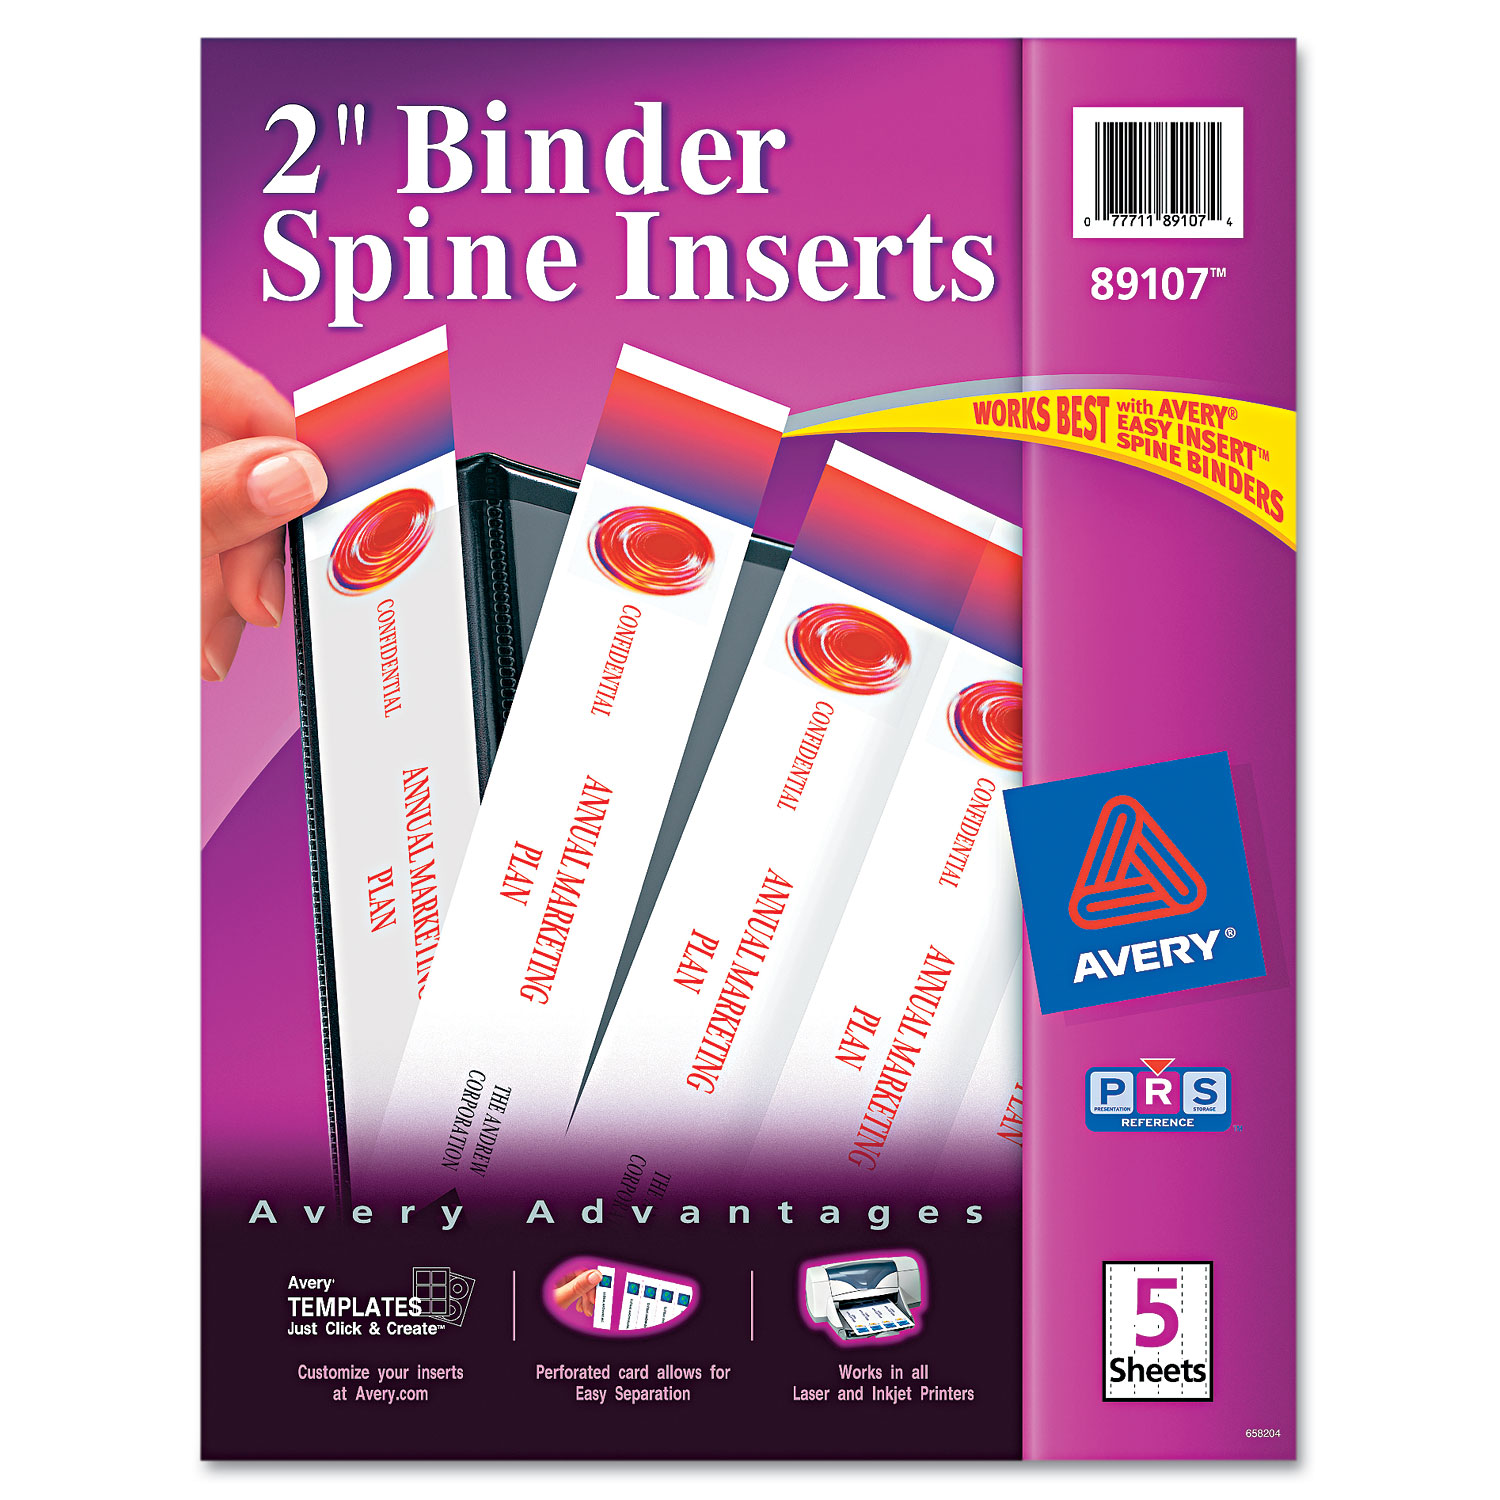 avery-ave89107-binder-spine-inserts-2-spine-width-4-inserts-sheet-5